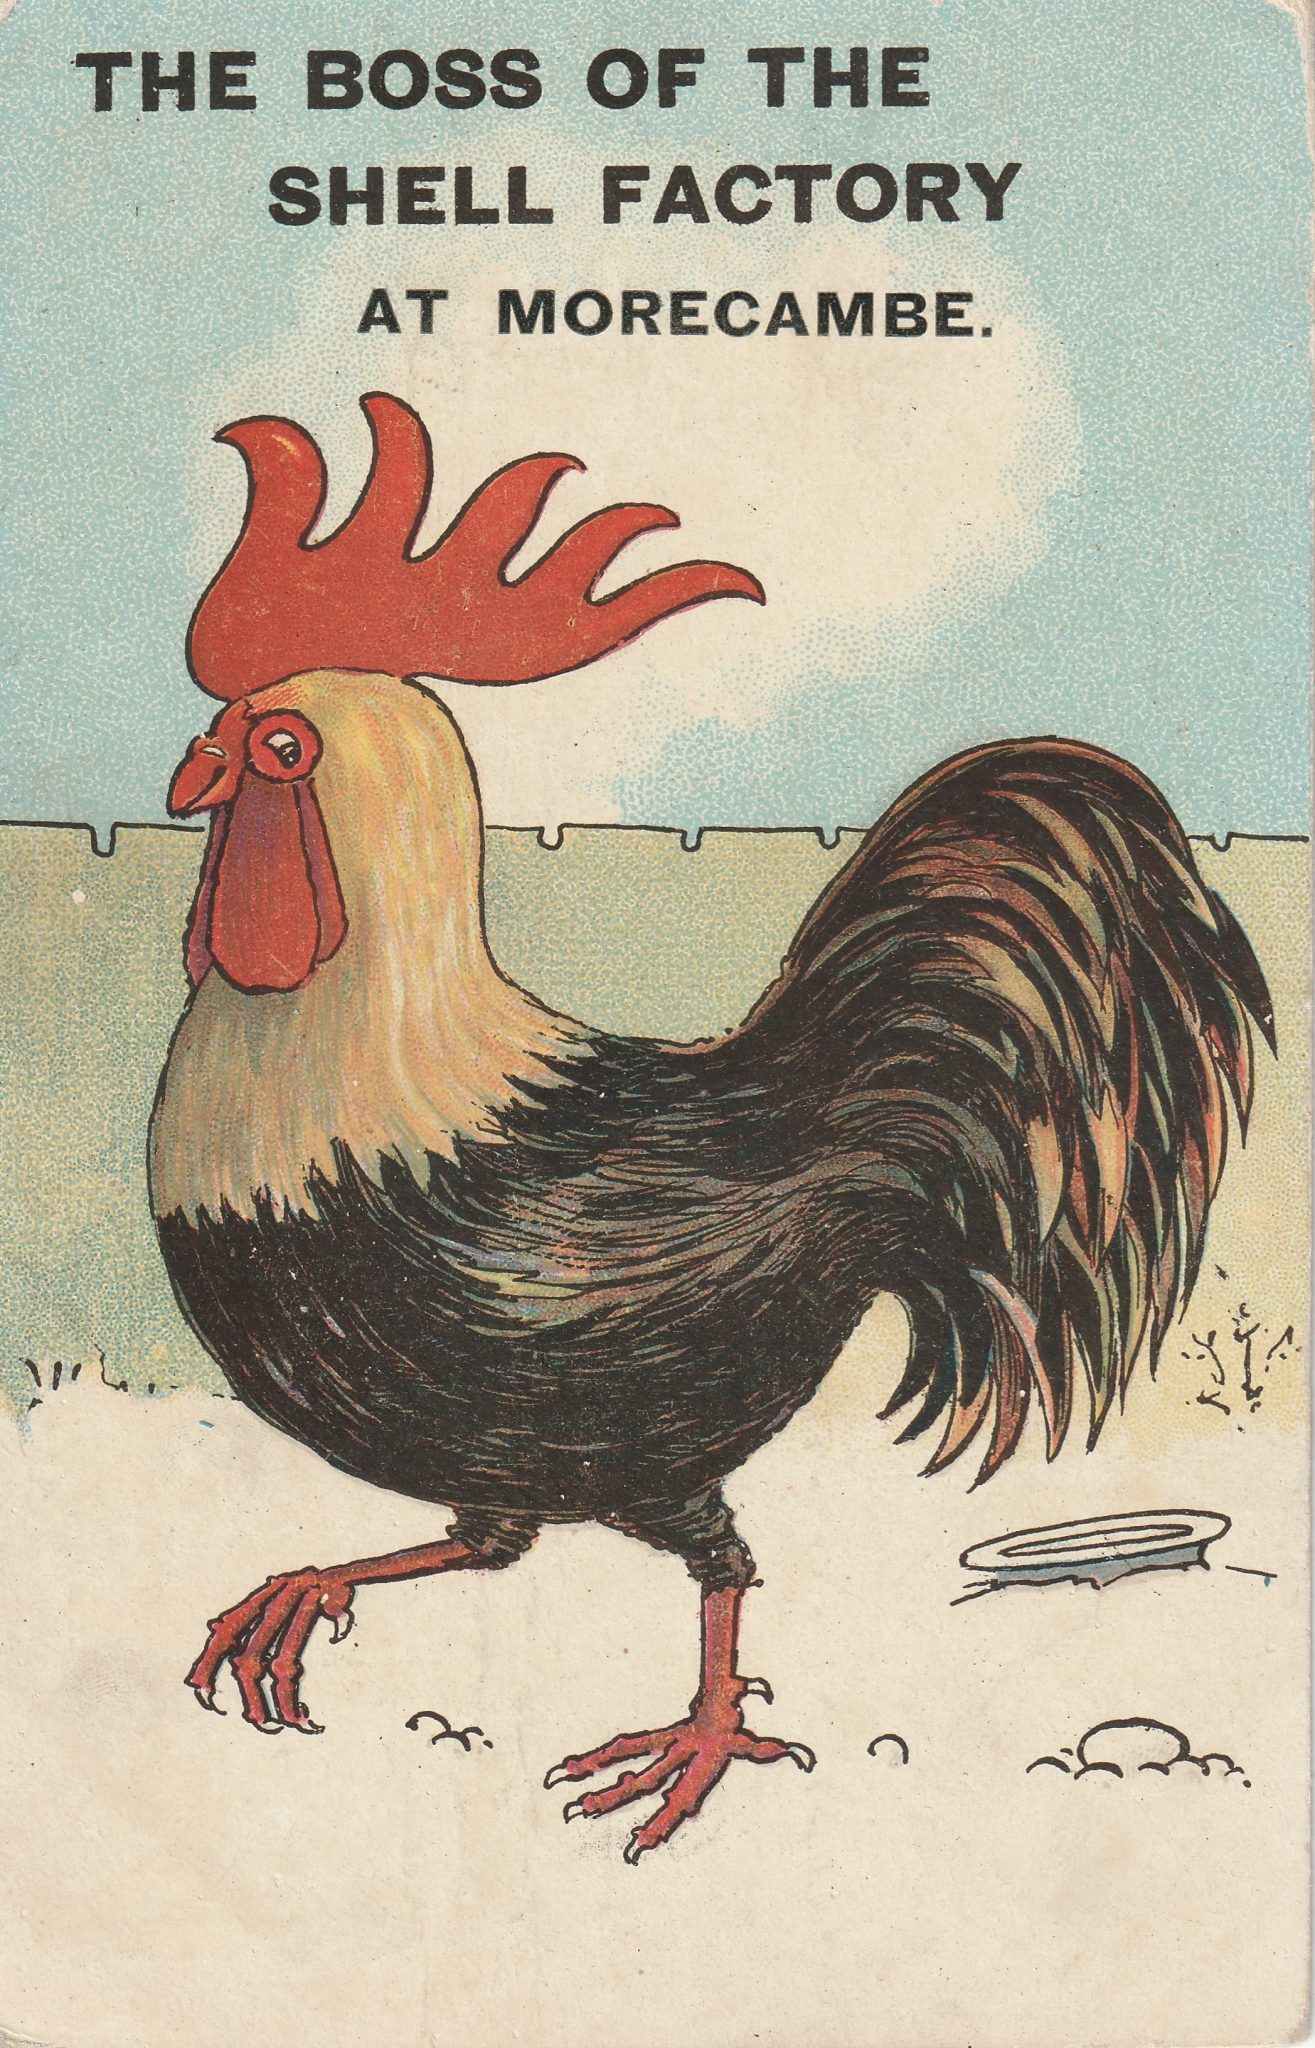 Postcard of a cockerel, which reads "The boss of the shell factory at Morecambe."